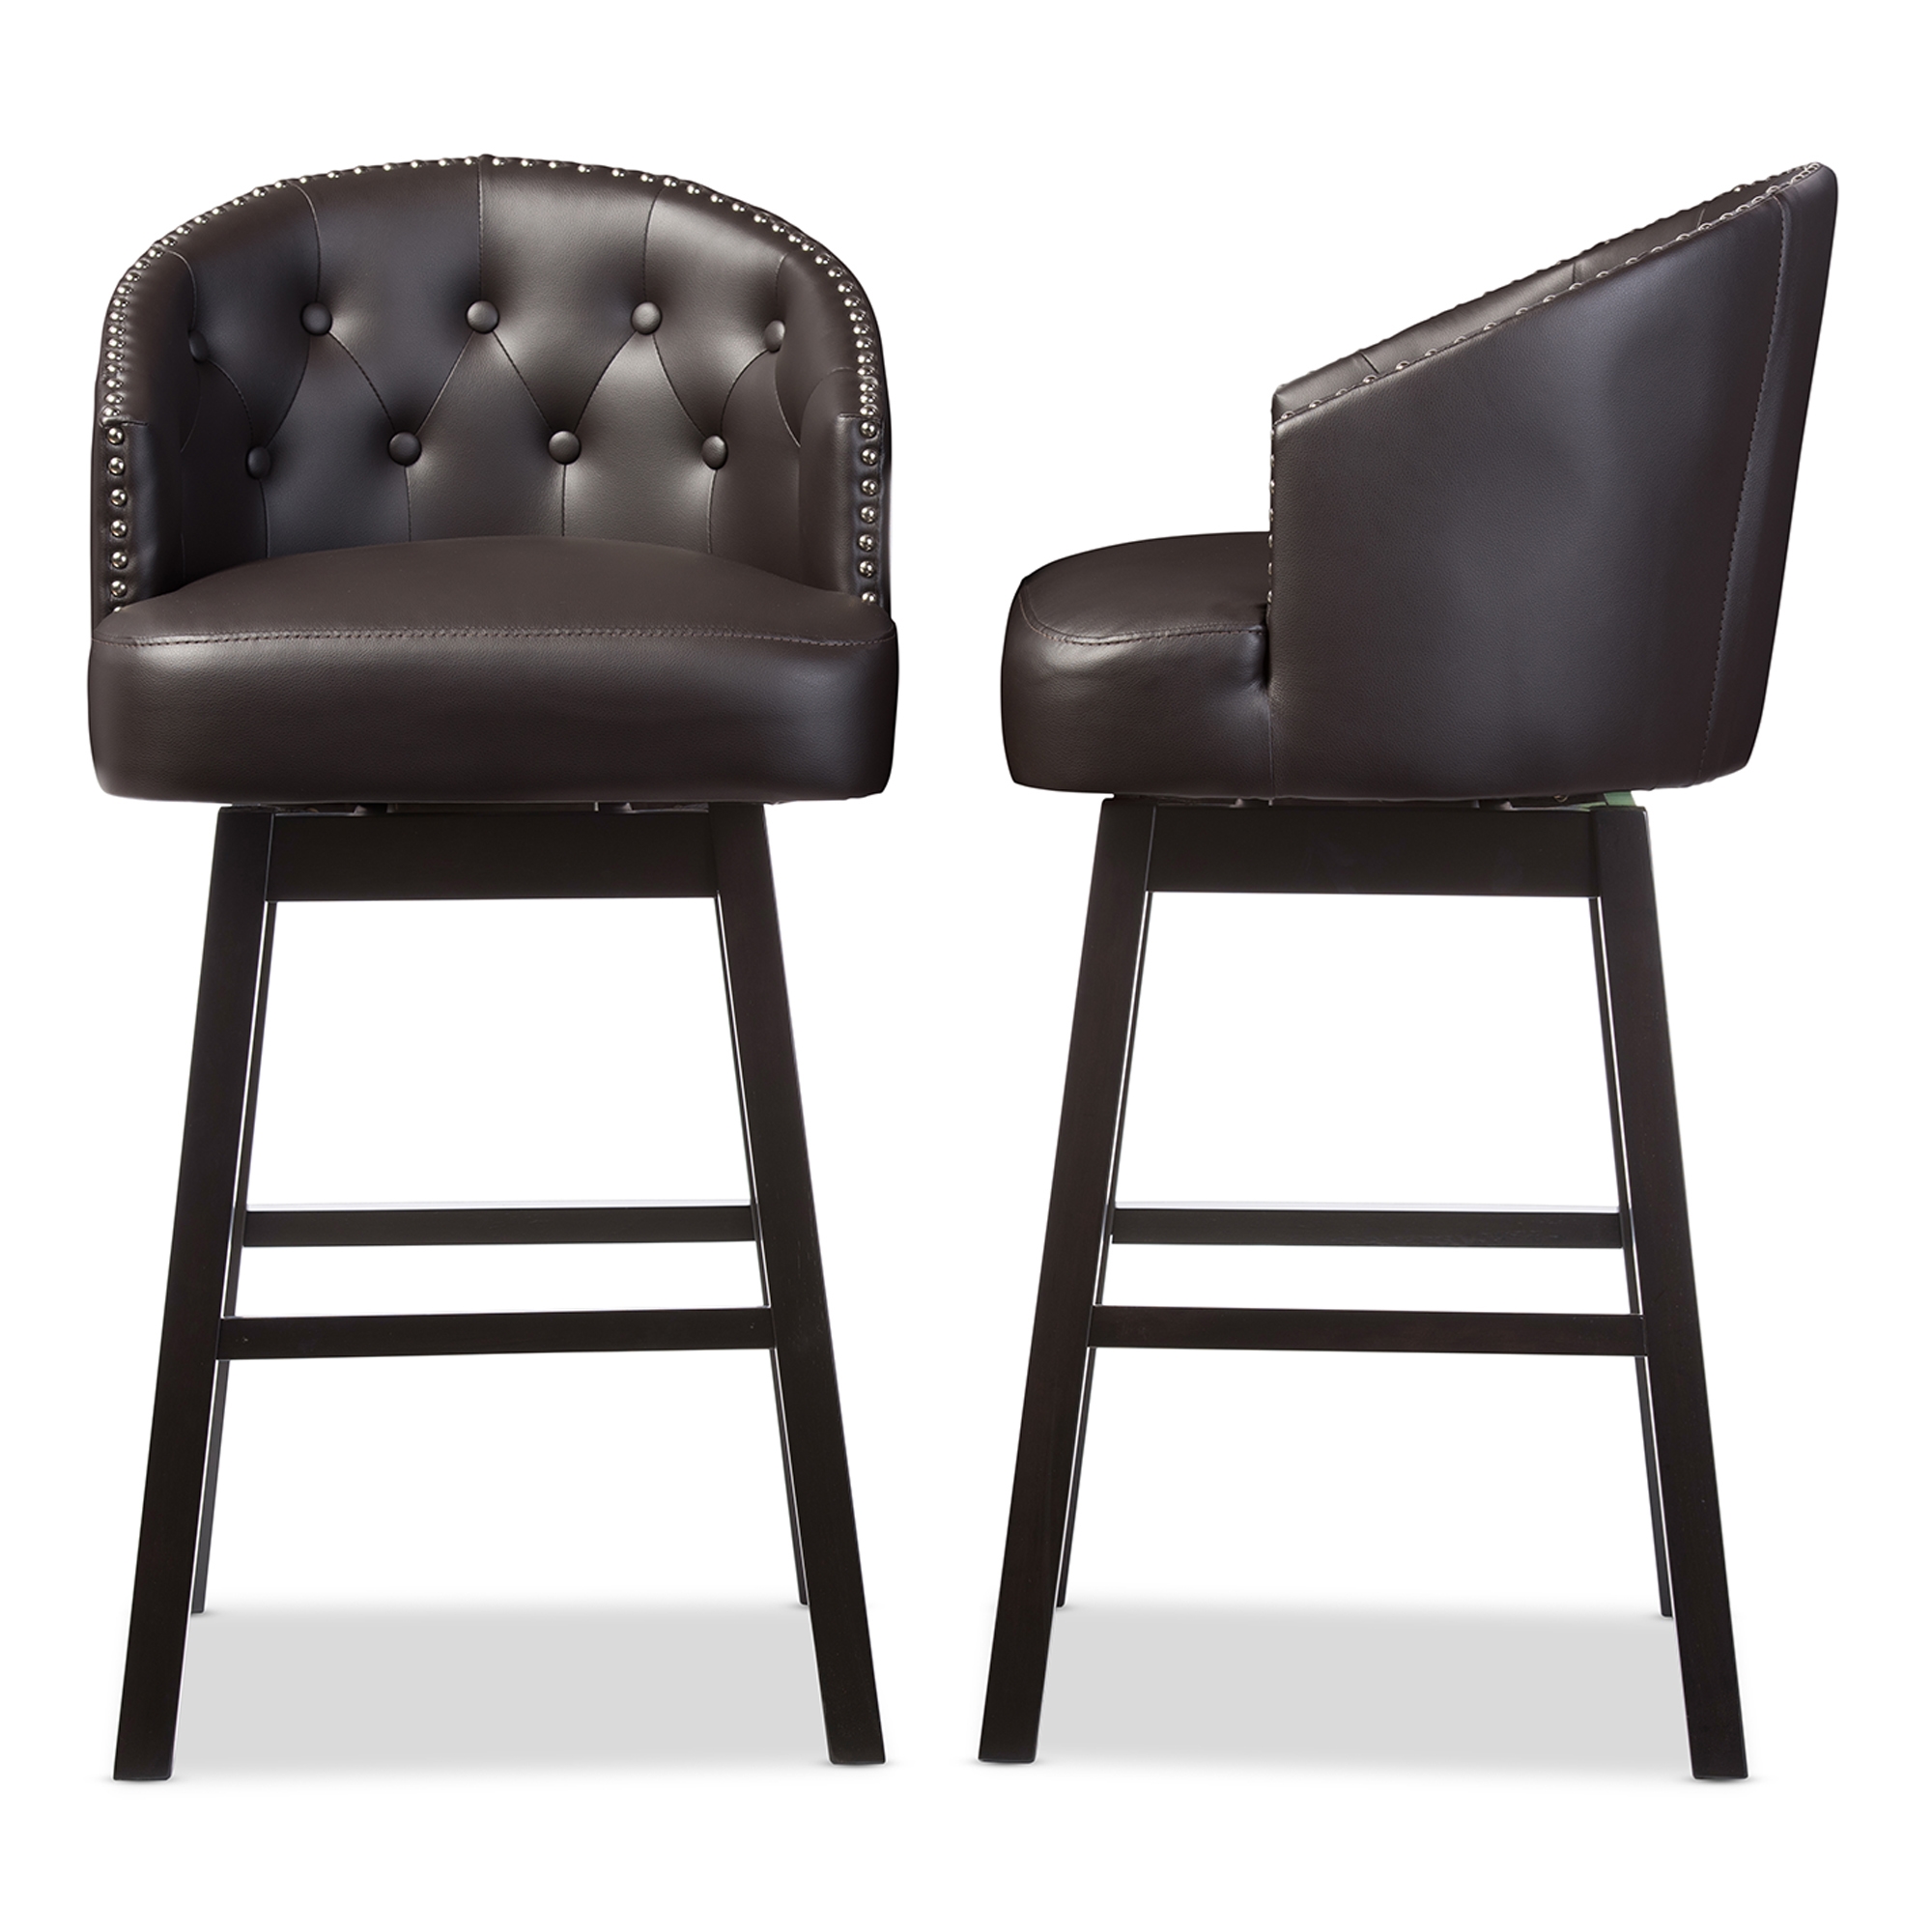 FAUX LEATHER CHAIRS RESTAURANT DINING CHAIRS MODERN BAR CHAIRS 